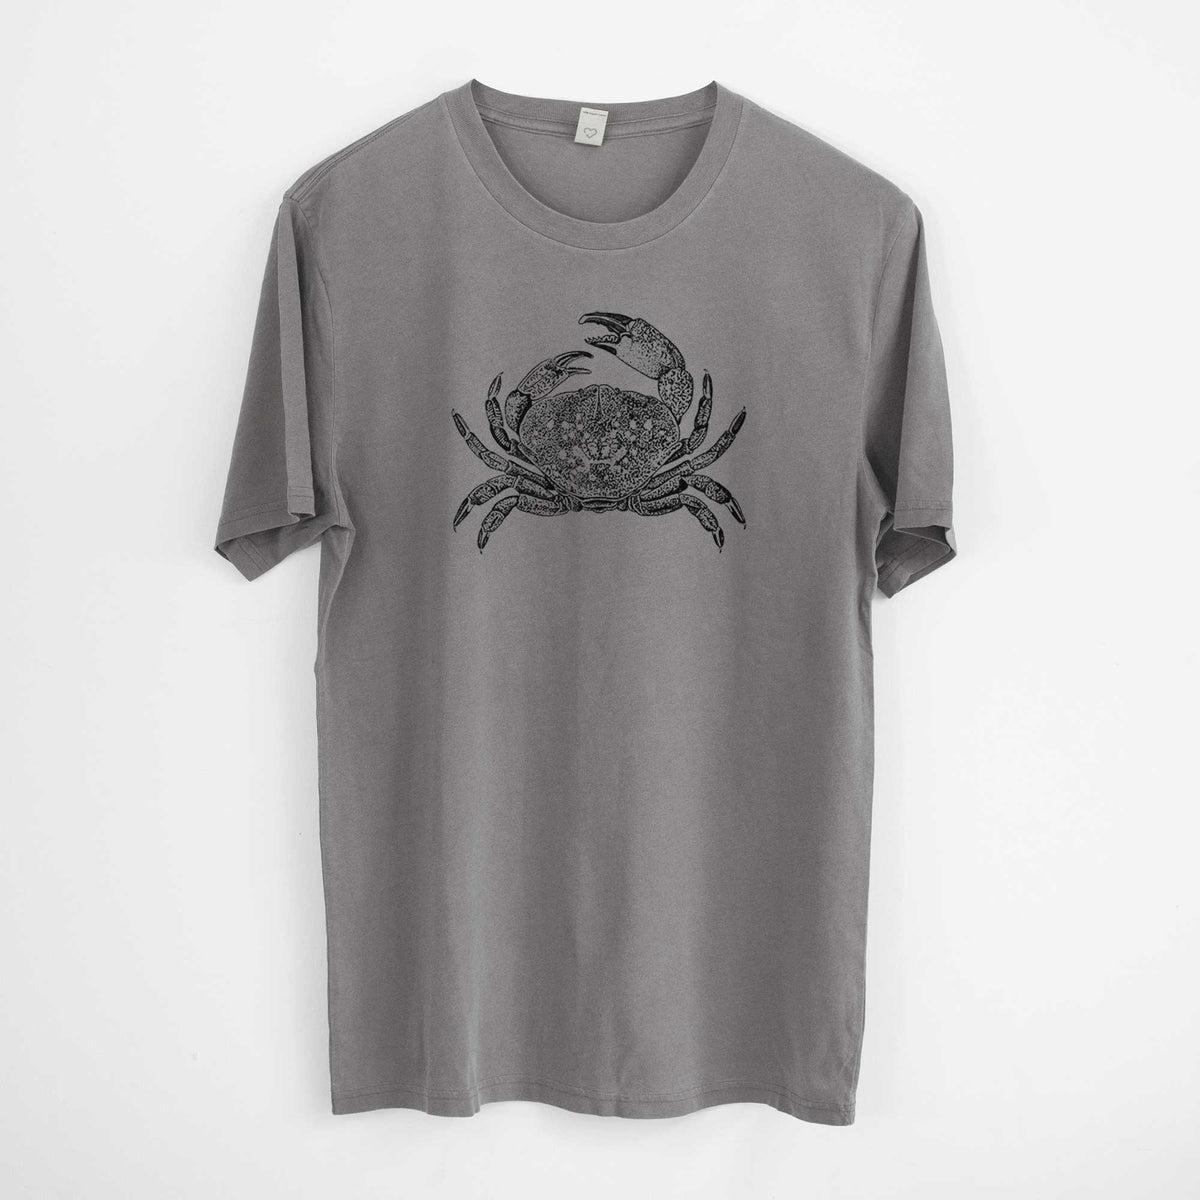 Dungeness Crab -  Mineral Wash 100% Organic Cotton Short Sleeve